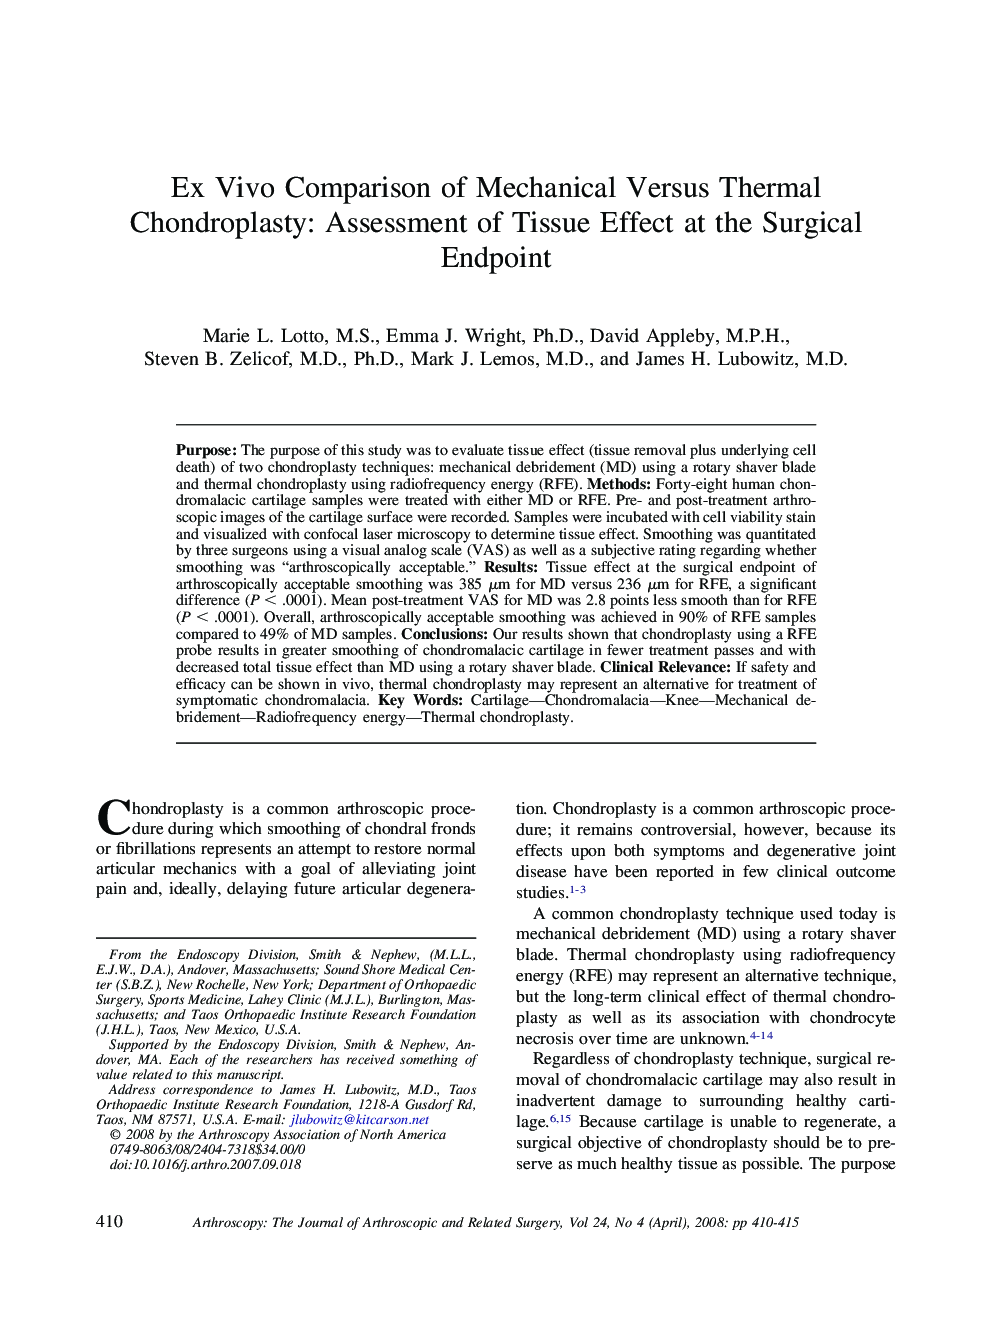 Ex Vivo Comparison of Mechanical Versus Thermal Chondroplasty: Assessment of Tissue Effect at the Surgical Endpoint 